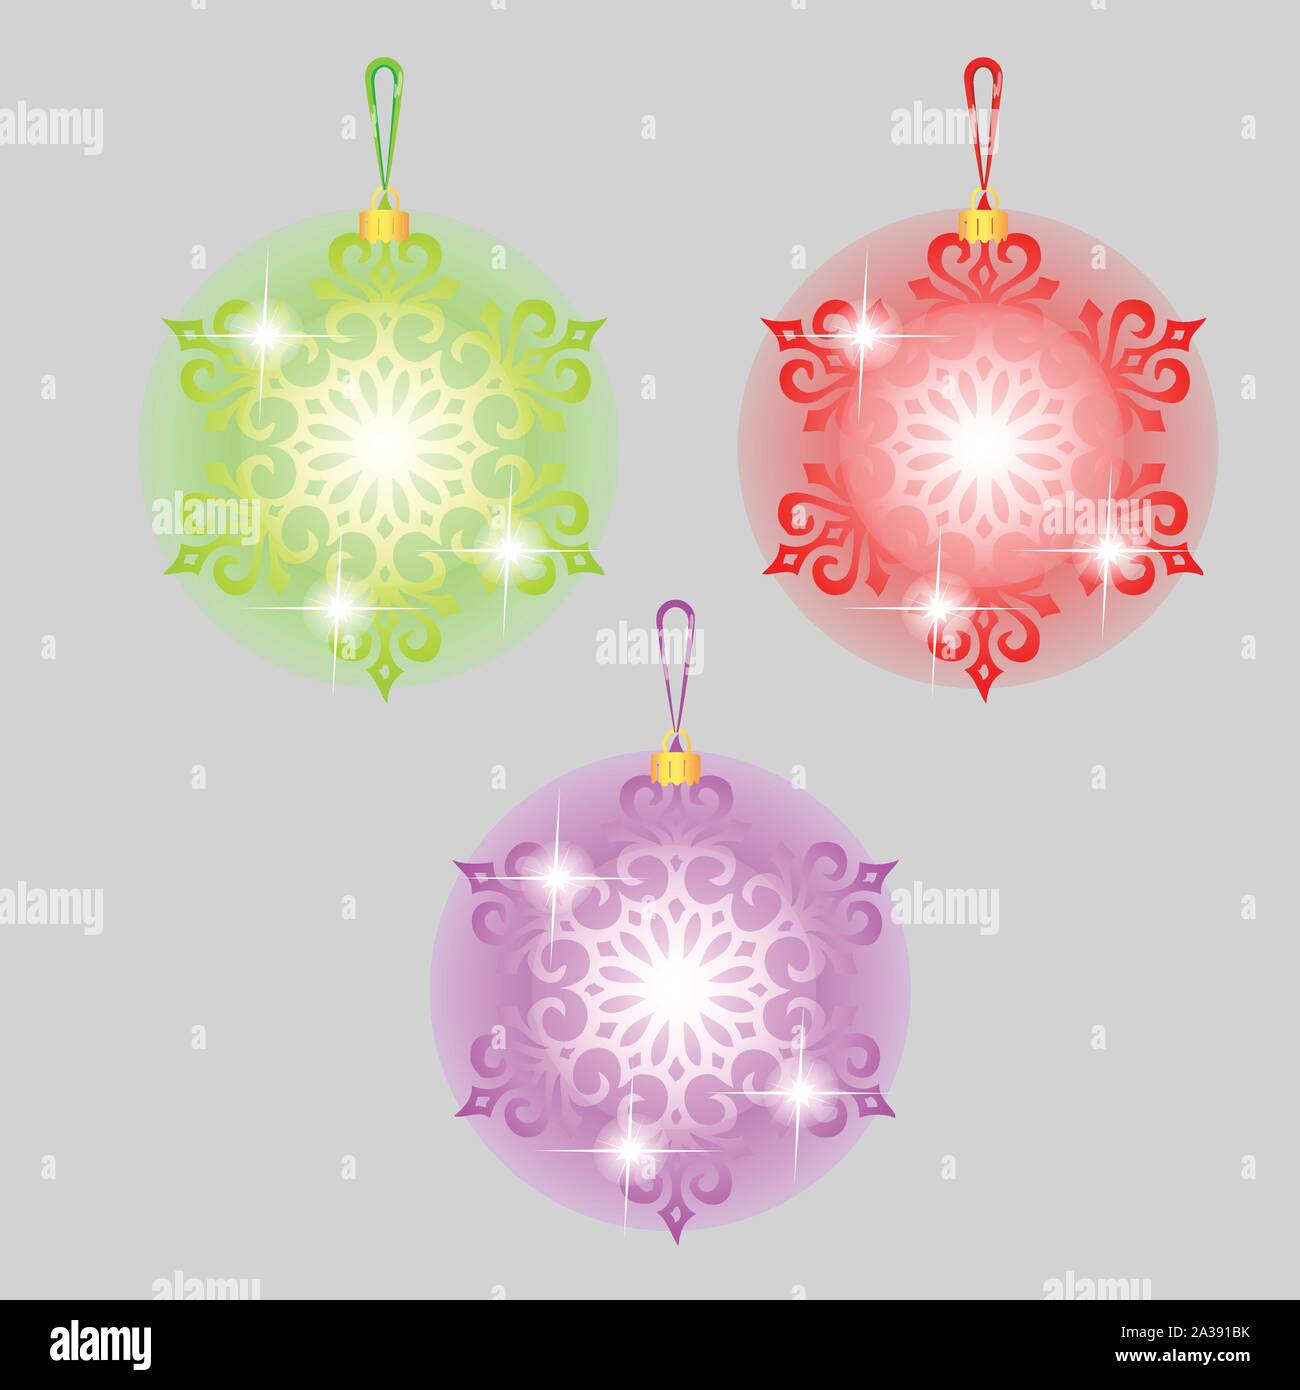 Sketch with Christmas tree decorations form of snowflakes isolated on grey background. Colorful festive baubles. Template of poster, invitation, other Stock Vector